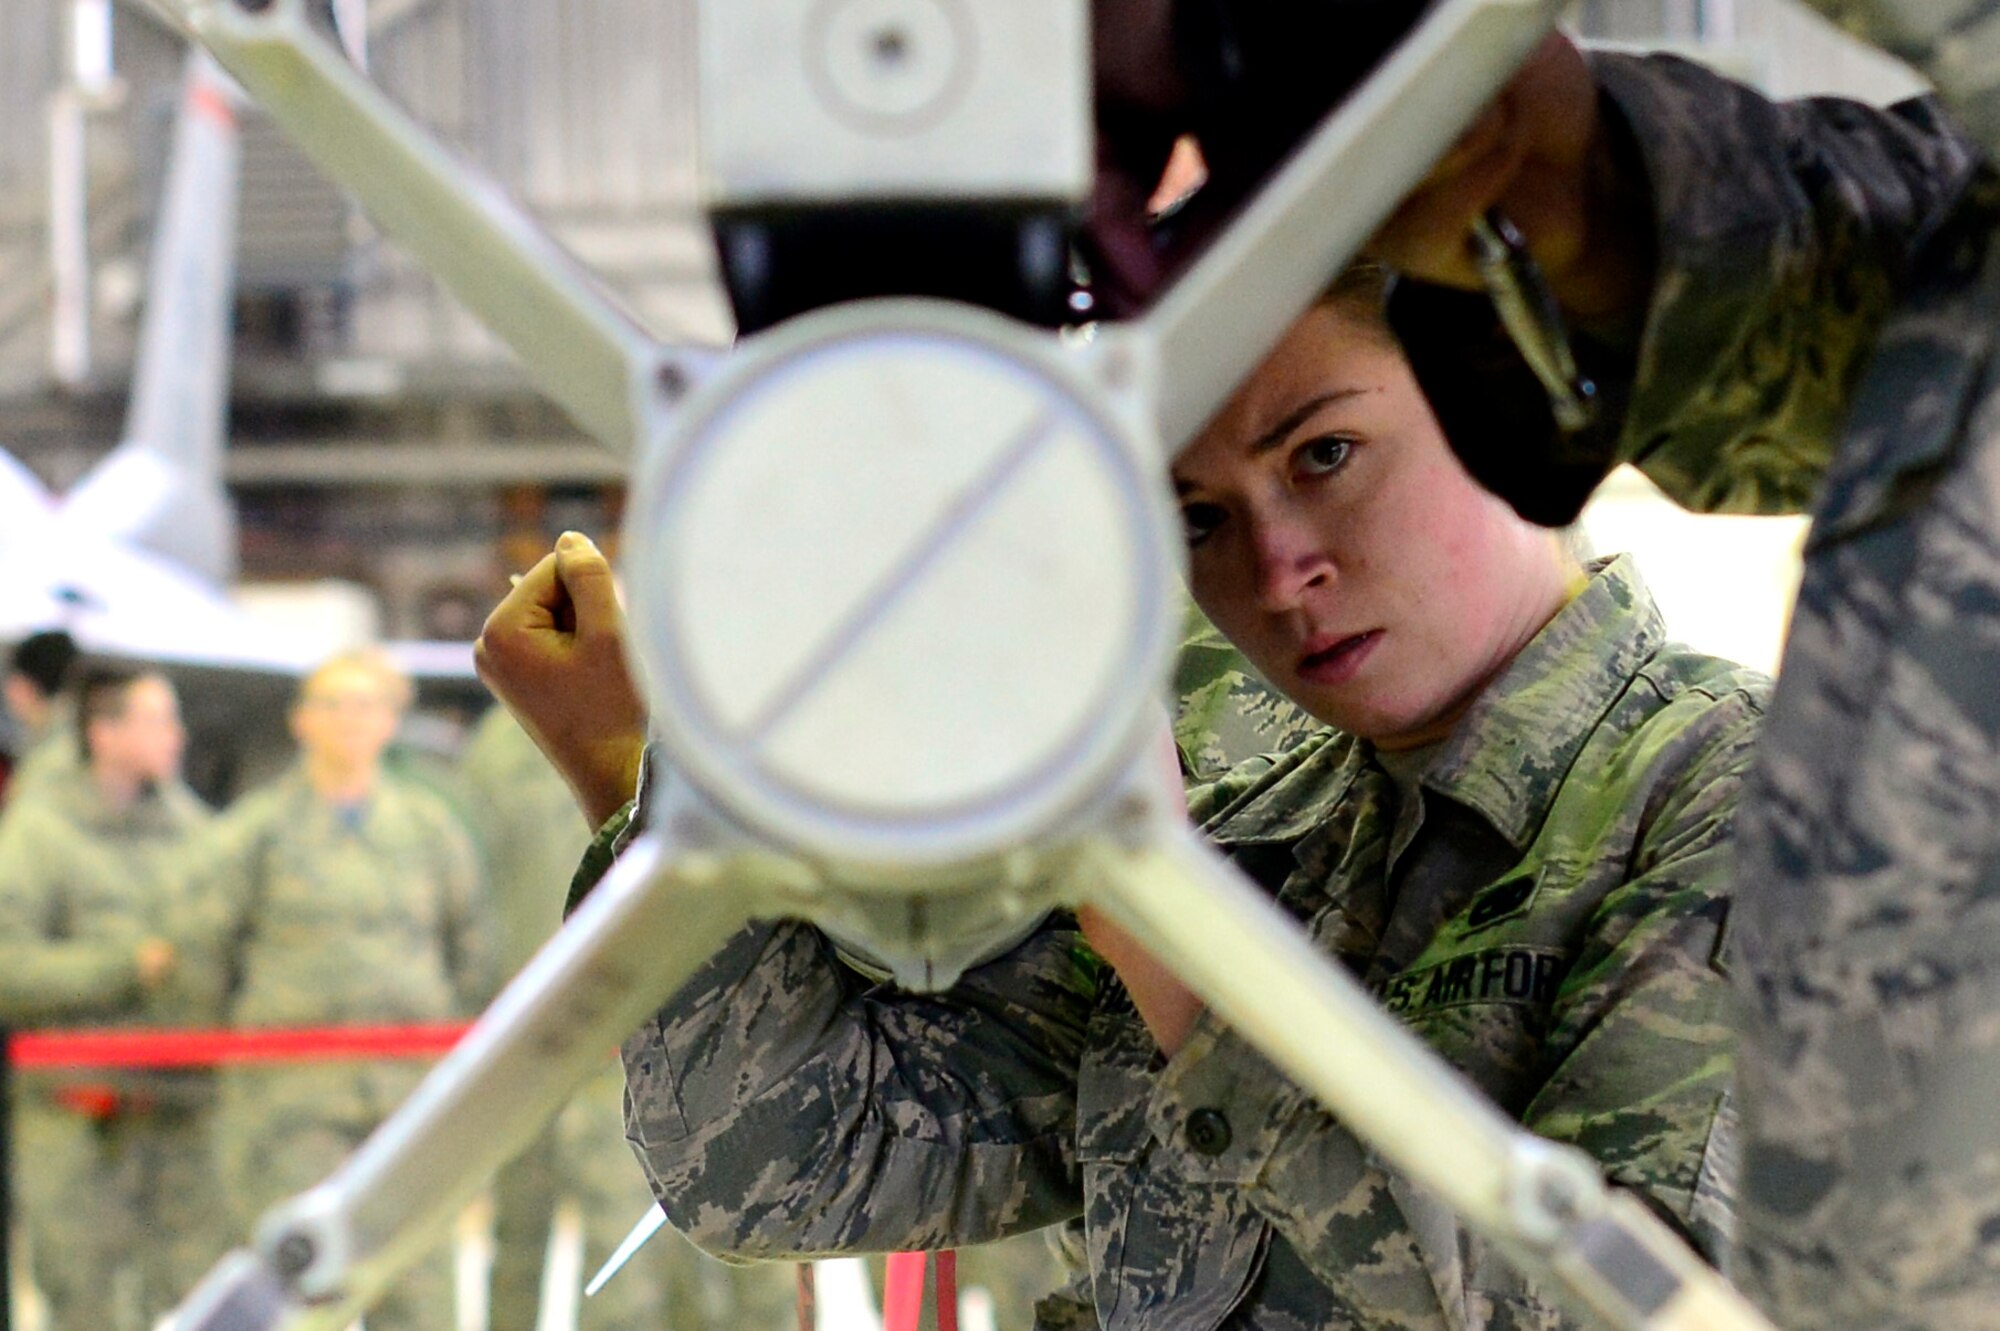 Senior Airman Haley Wolochowicz inspects a weapon for loading during a Weapons Load Crew Competition at Spangdahlem Air Base, Germany, Feb. 9, 2018. The competition featured two teams competing to be the wing’s best load crew and the winners will be announced at their annual Maintenance Professional of the Year banquet. (U.S. Air Force photo by Tech. Sgt. Staci Kasischke)